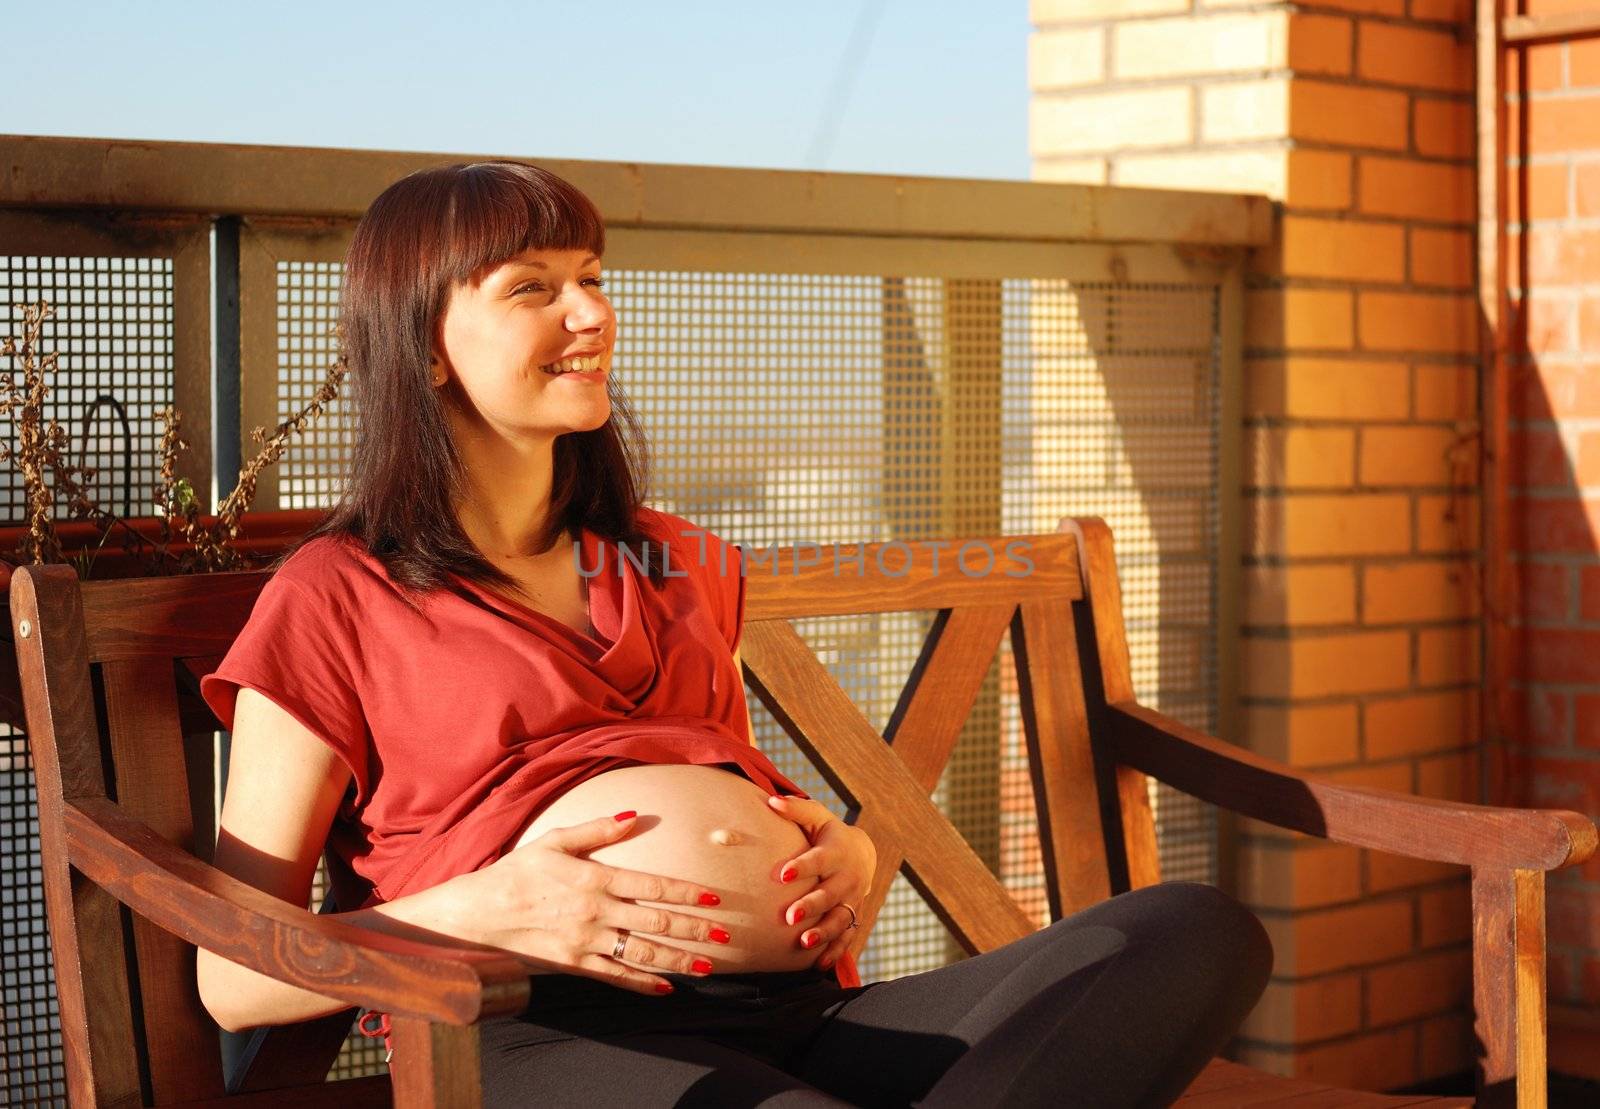 Pregnant woman waiting for a first child. Sunlight.